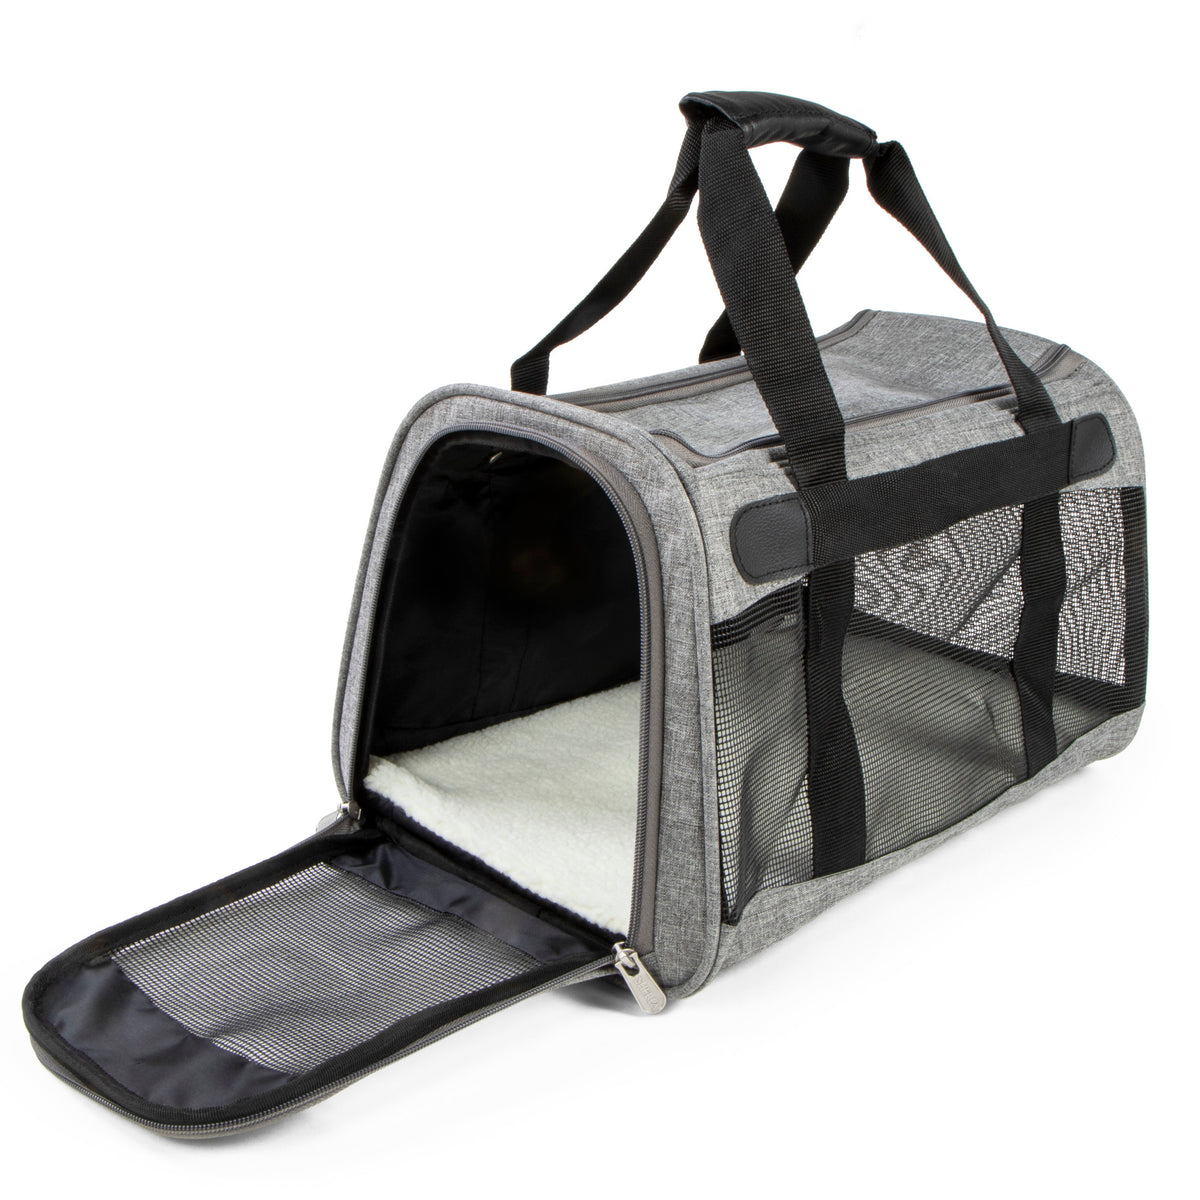 The Pet Carrier